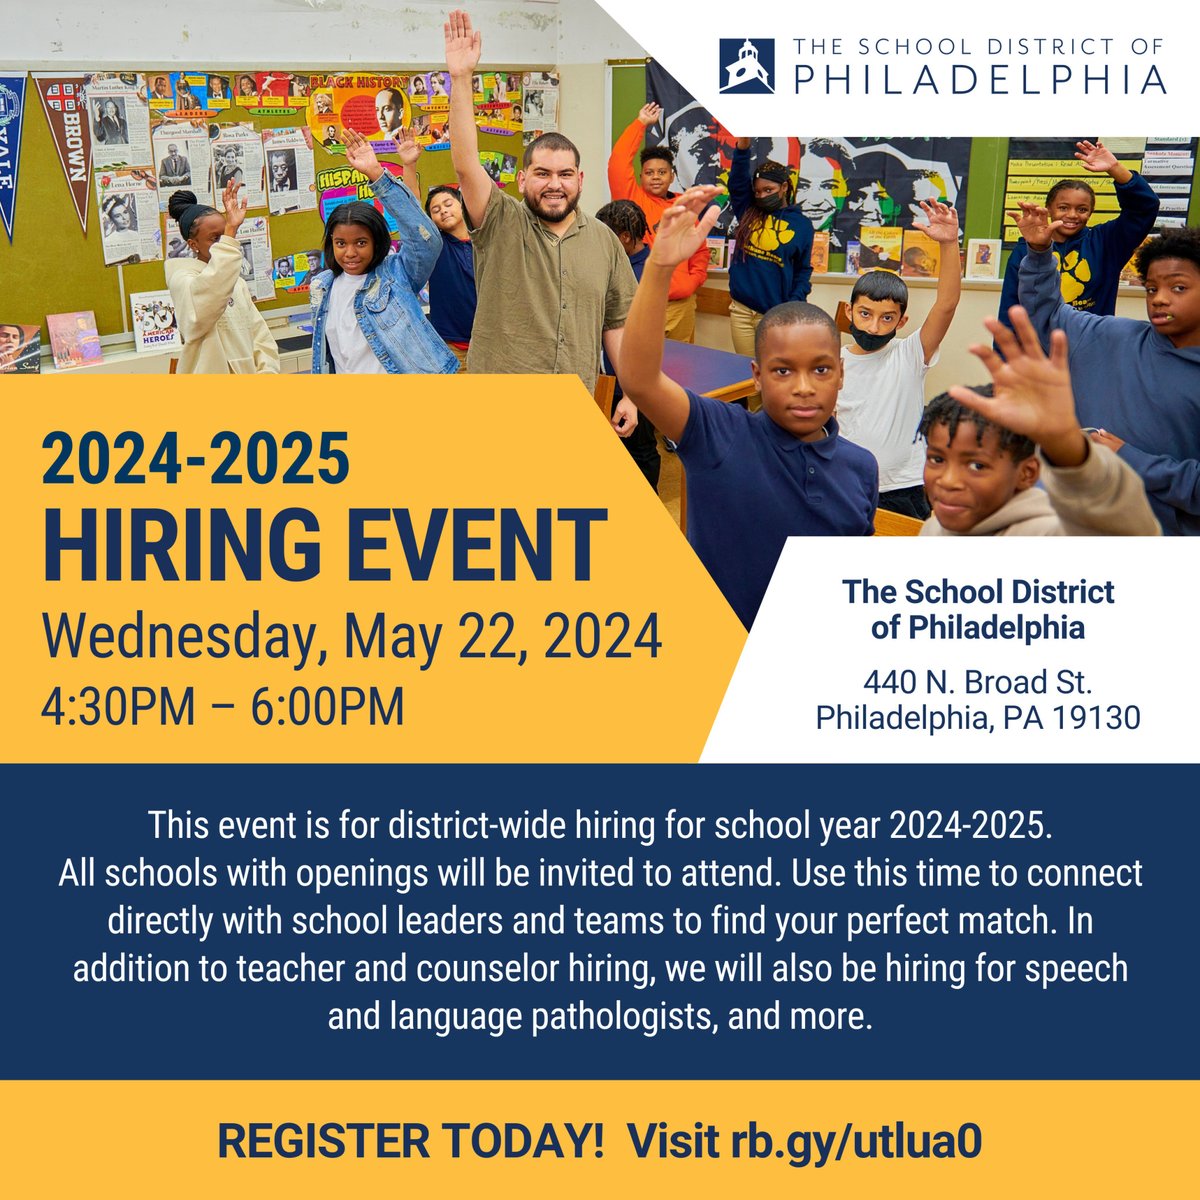 Join us for a district-wide hiring event for the school year 2024-2025! 📅 Wednesday, May 22, 2024 ⏰ 4:30 PM - 6:00 PM REGISTER TODAY! Visit rb.gy/utlua0